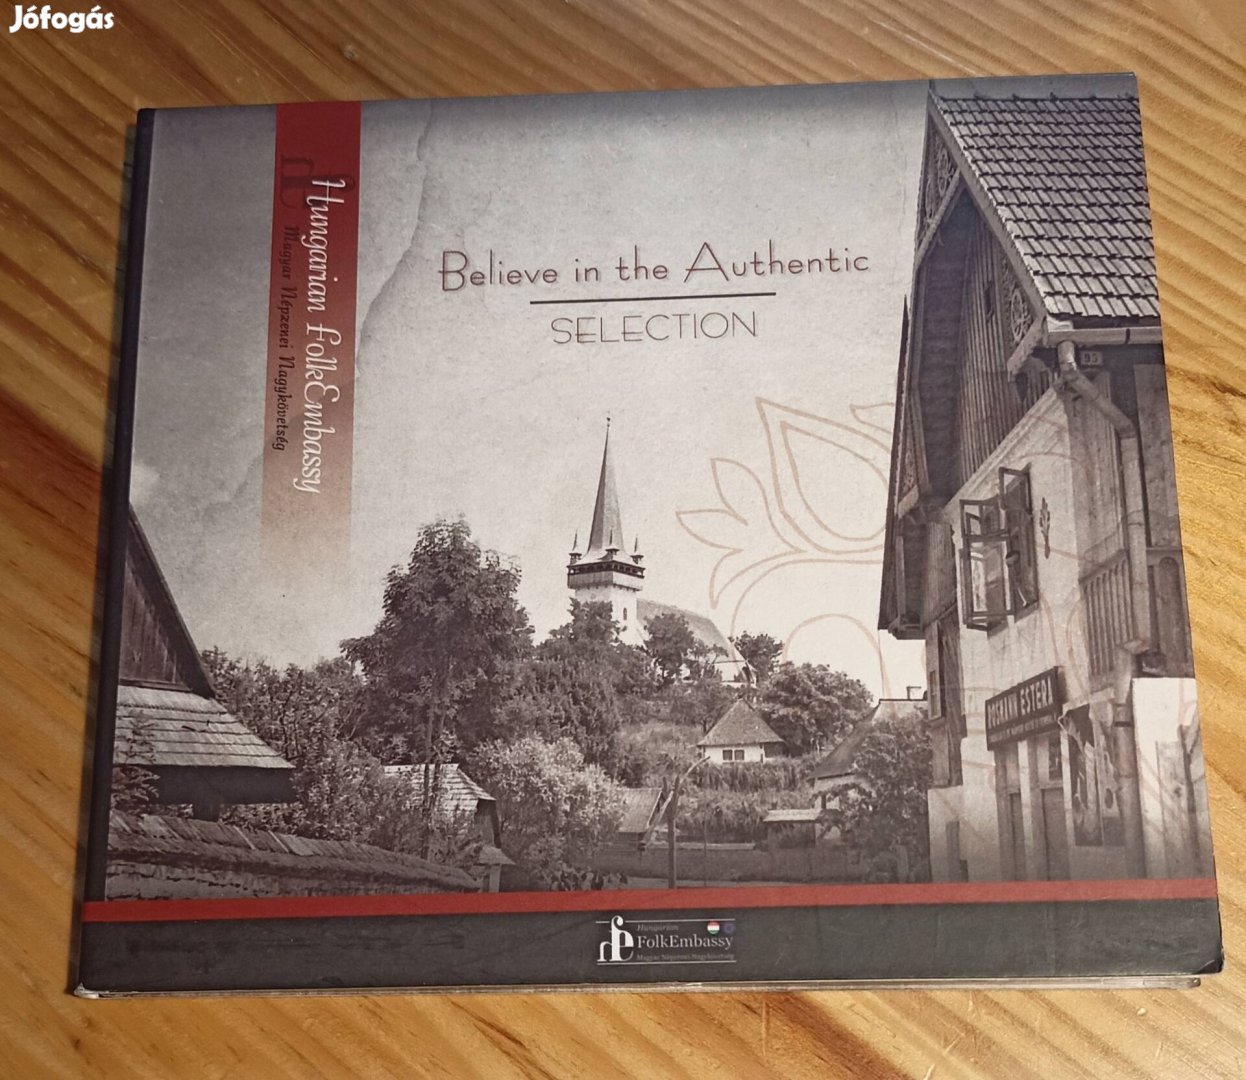 Hungarian Folk Embassy - Believe in the authentic CD